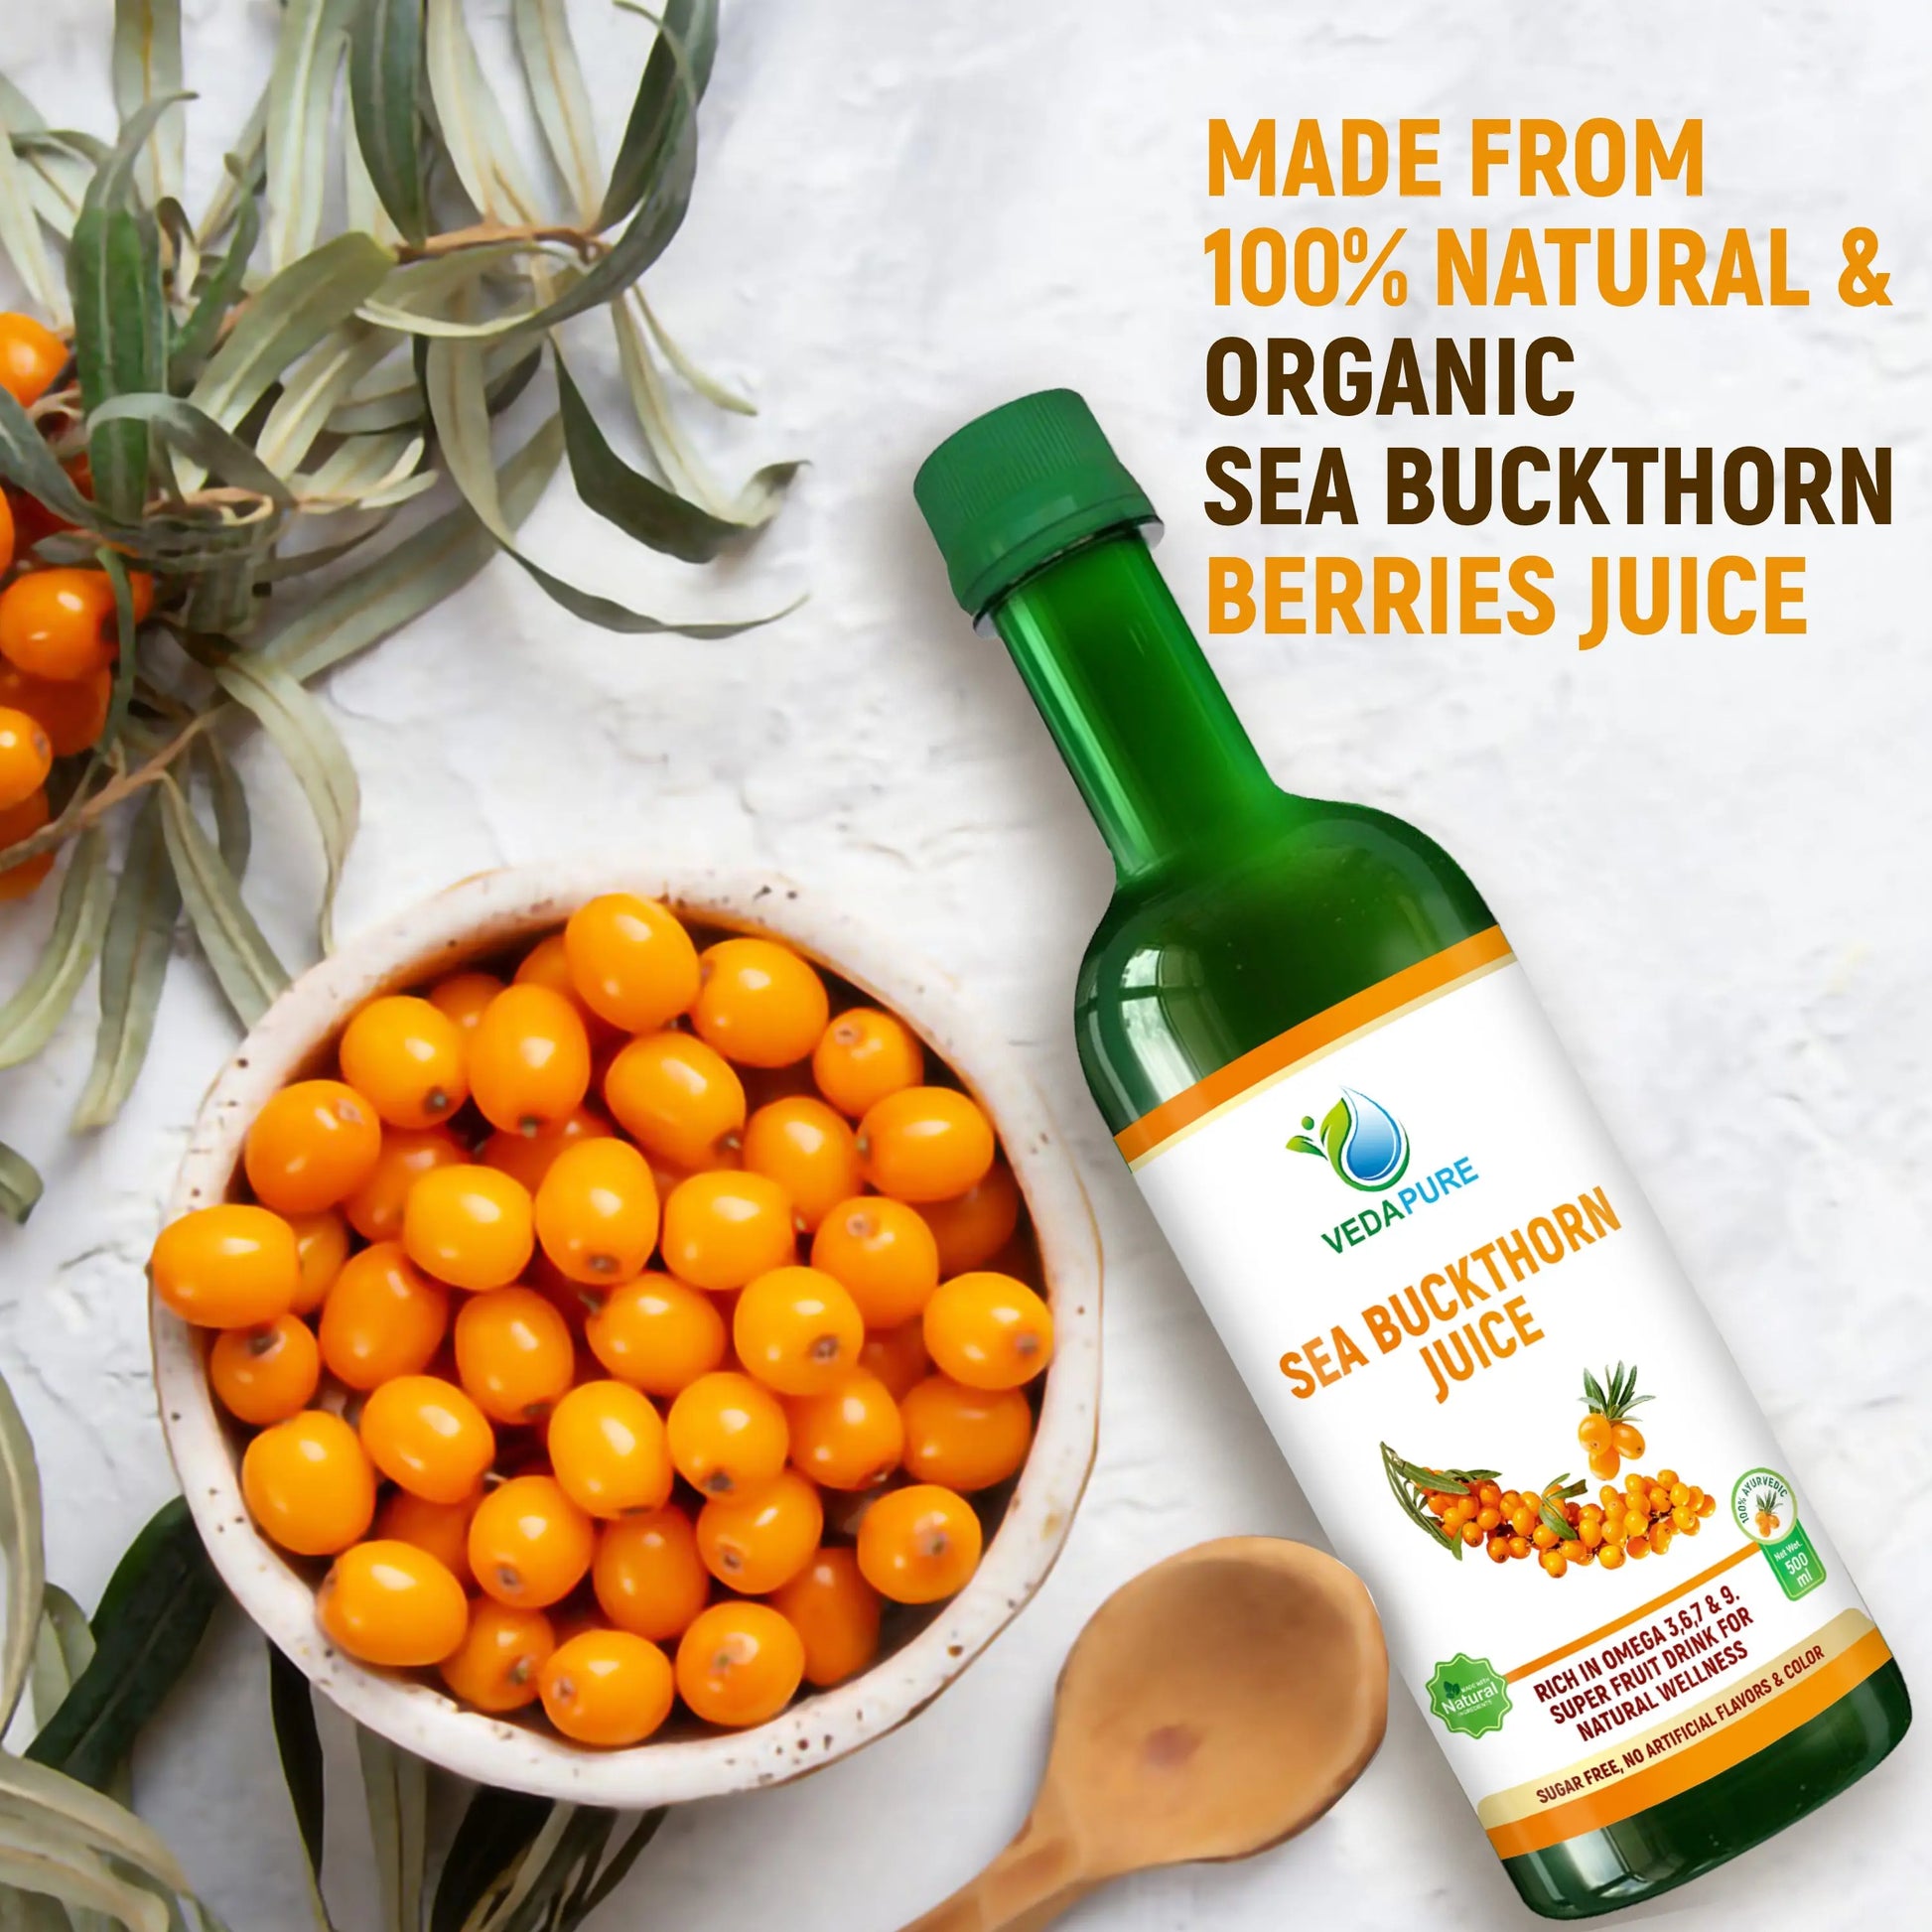 Vedapure Sea Buckthorn Juice For Healthy Body 500ML Vedapure Naturals